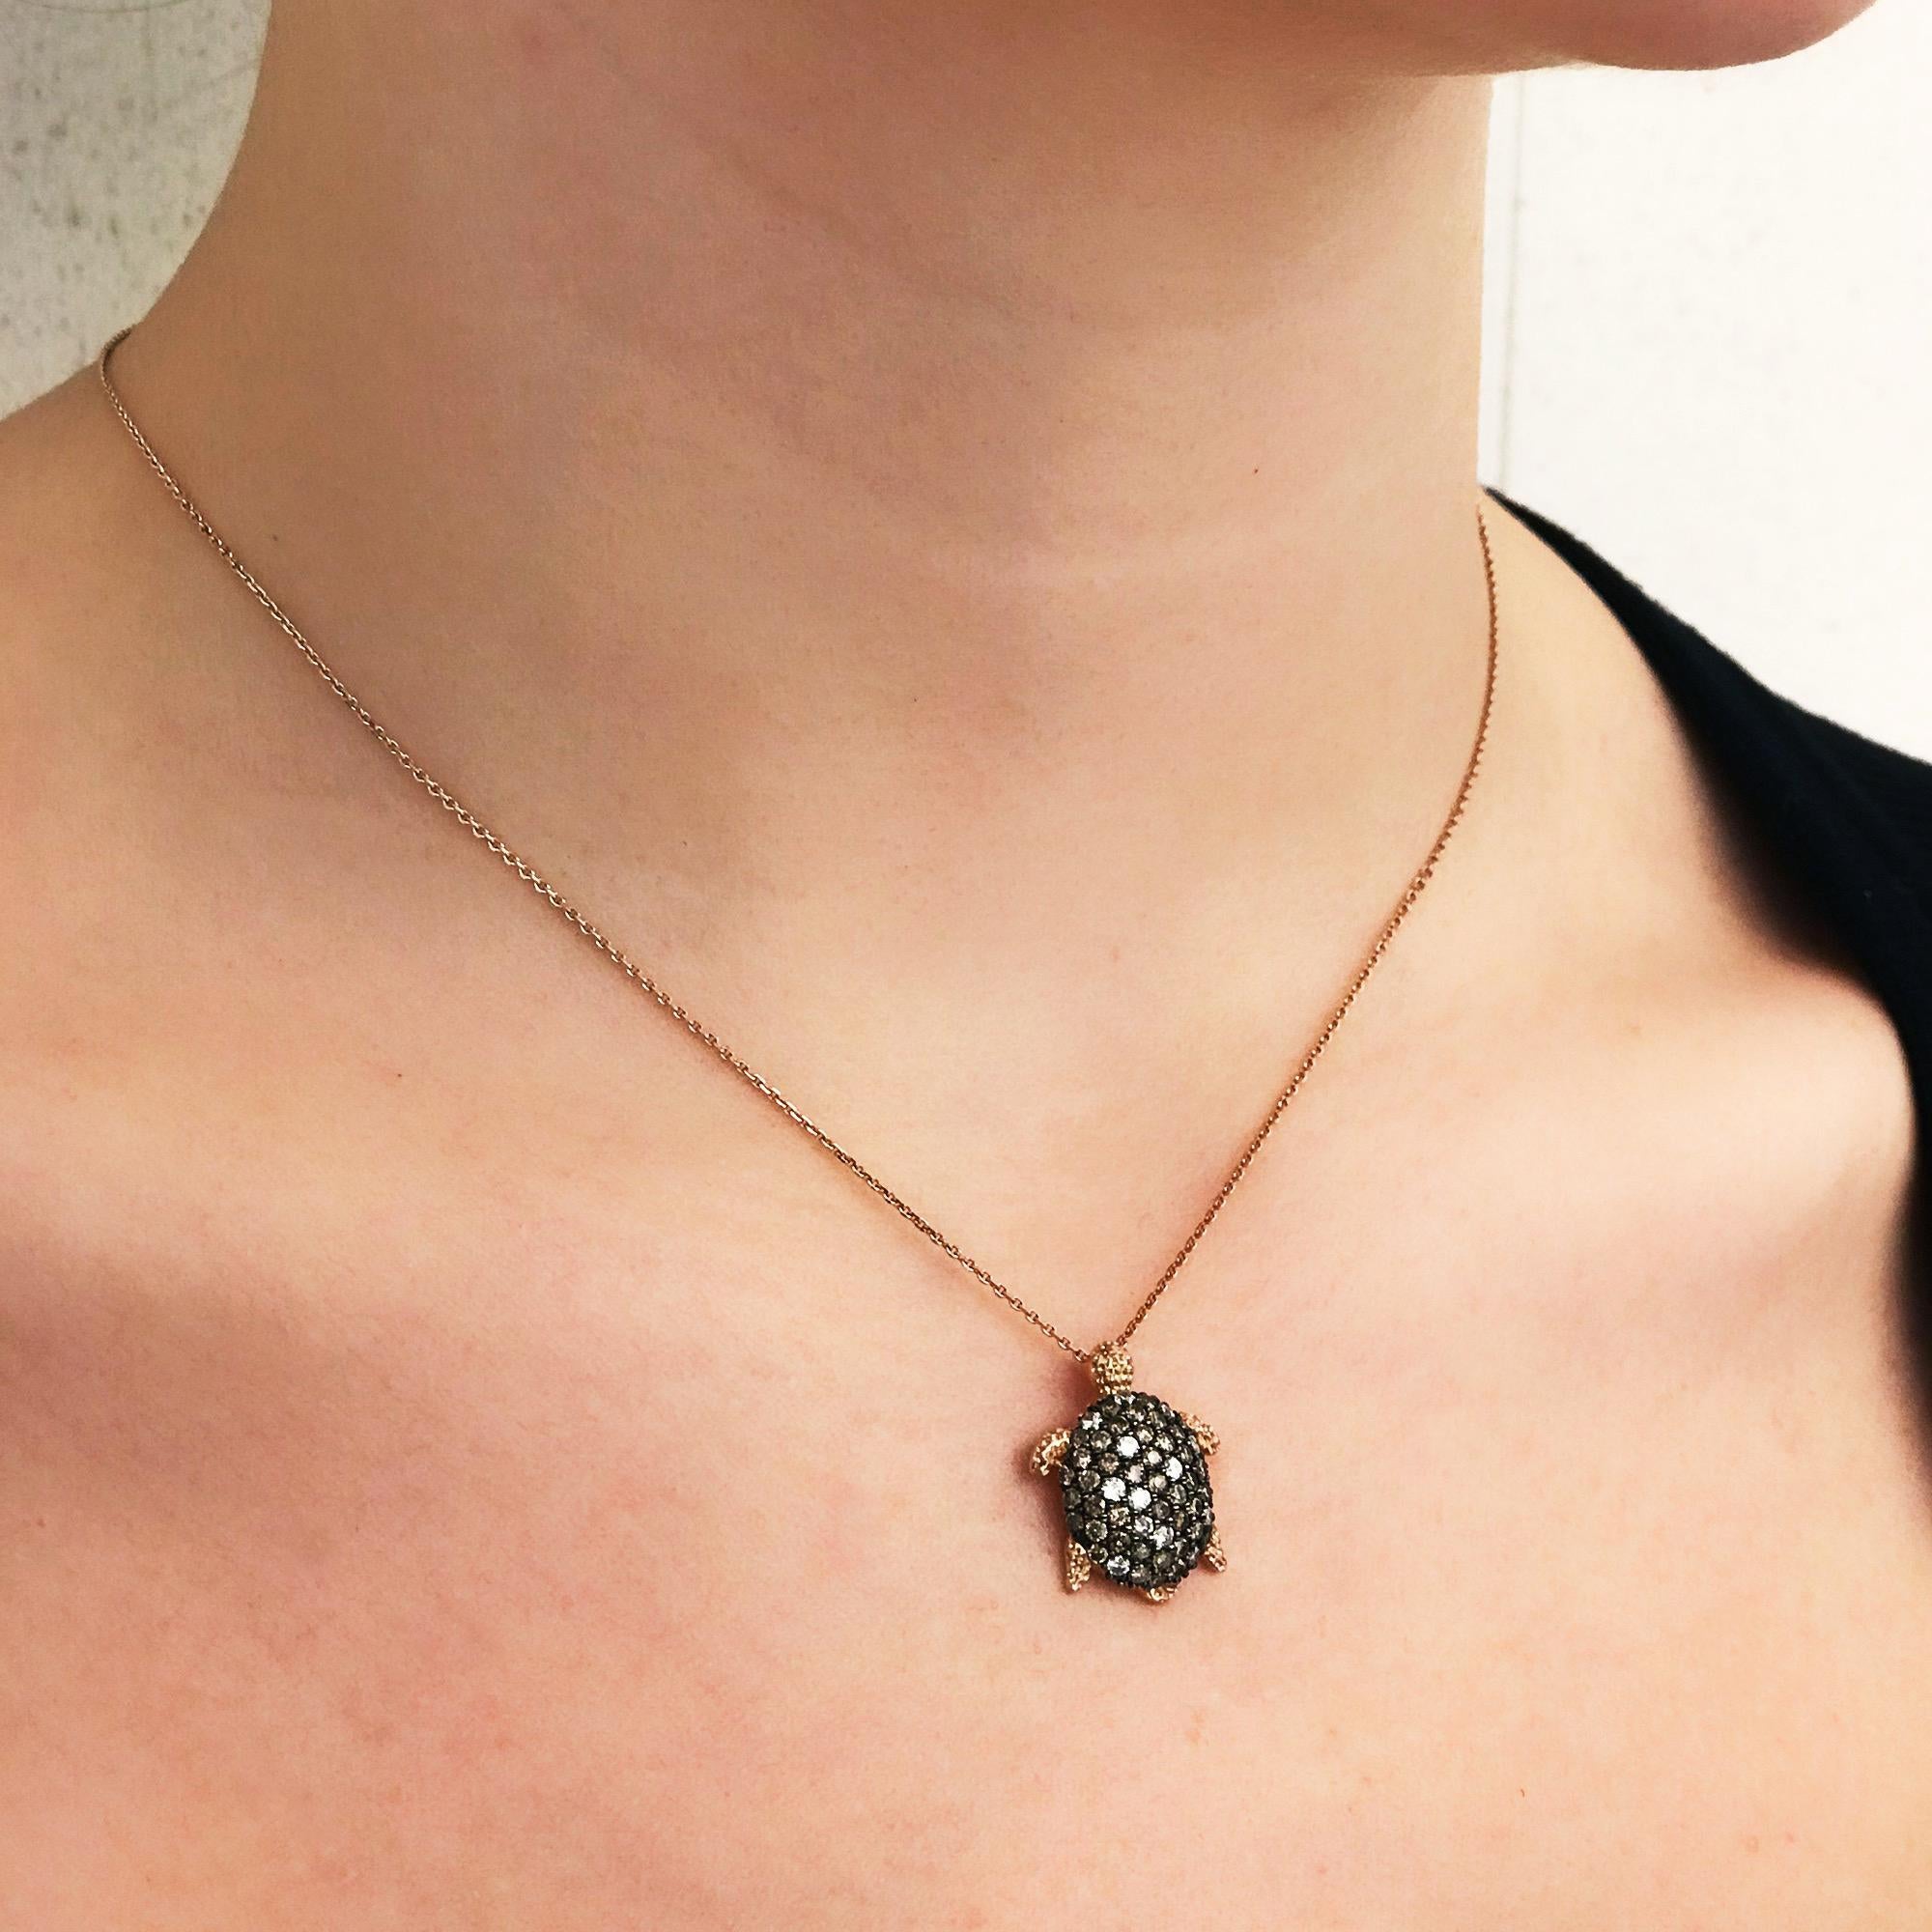 The Turtle Necklace is a charming reminder to slow down, trust life and be confident. An ode to the mystical creatures of the sea, who cease to remain ashore despite the unknown, the Turtle necklace is an incomparable talisman of vitality and